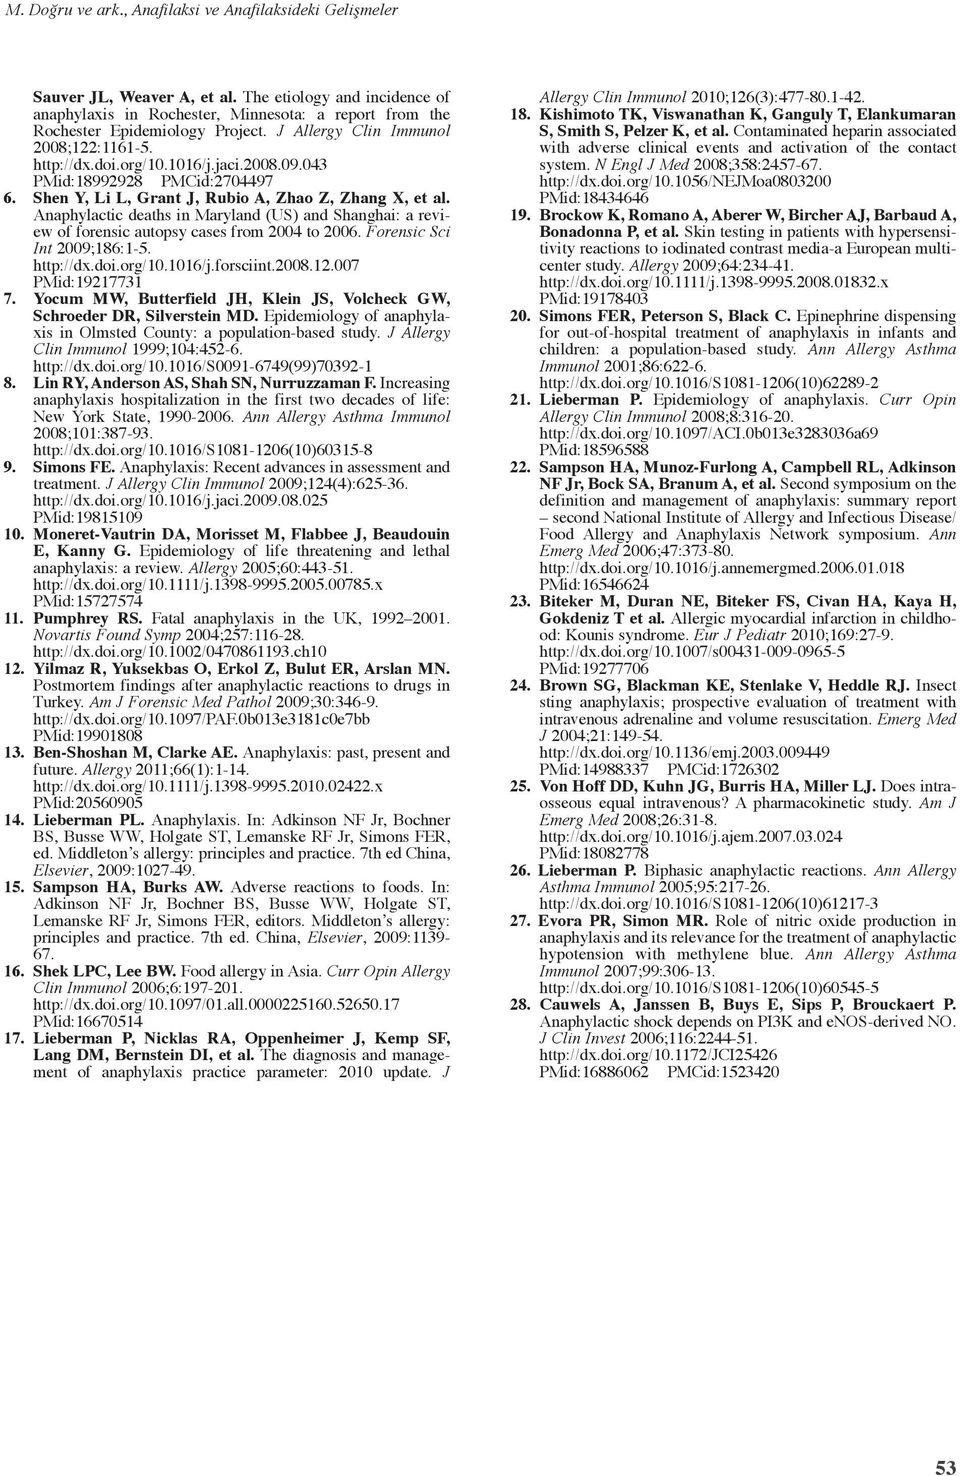 043 PMid:18992928 PMCid:2704497 6. Shen Y, Li L, Grant J, Rubio A, Zhao Z, Zhang X, et al. Anaphylactic deaths in Maryland (US) and Shanghai: a review of forensic autopsy cases from 2004 to 2006.